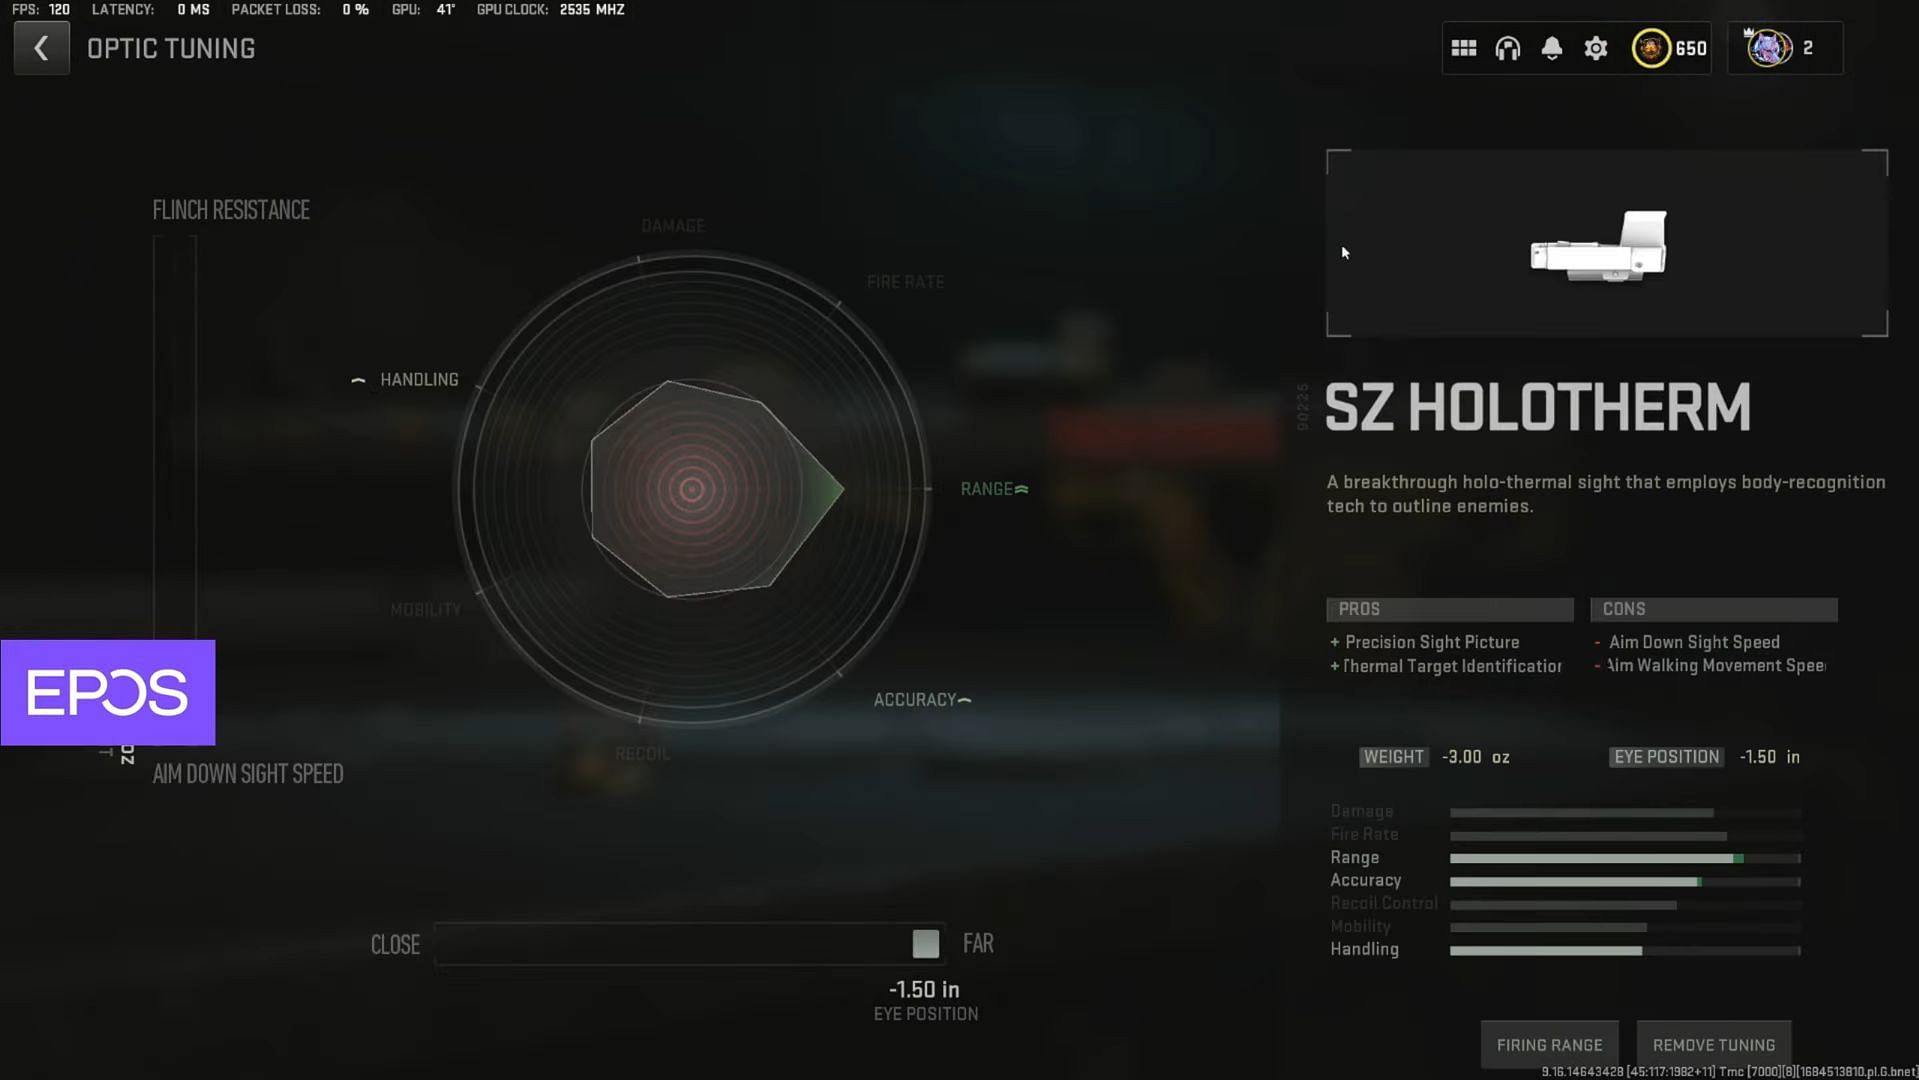 Tuning for SZ Holo Therm (Image via Activision and YouTube/Metaphor)